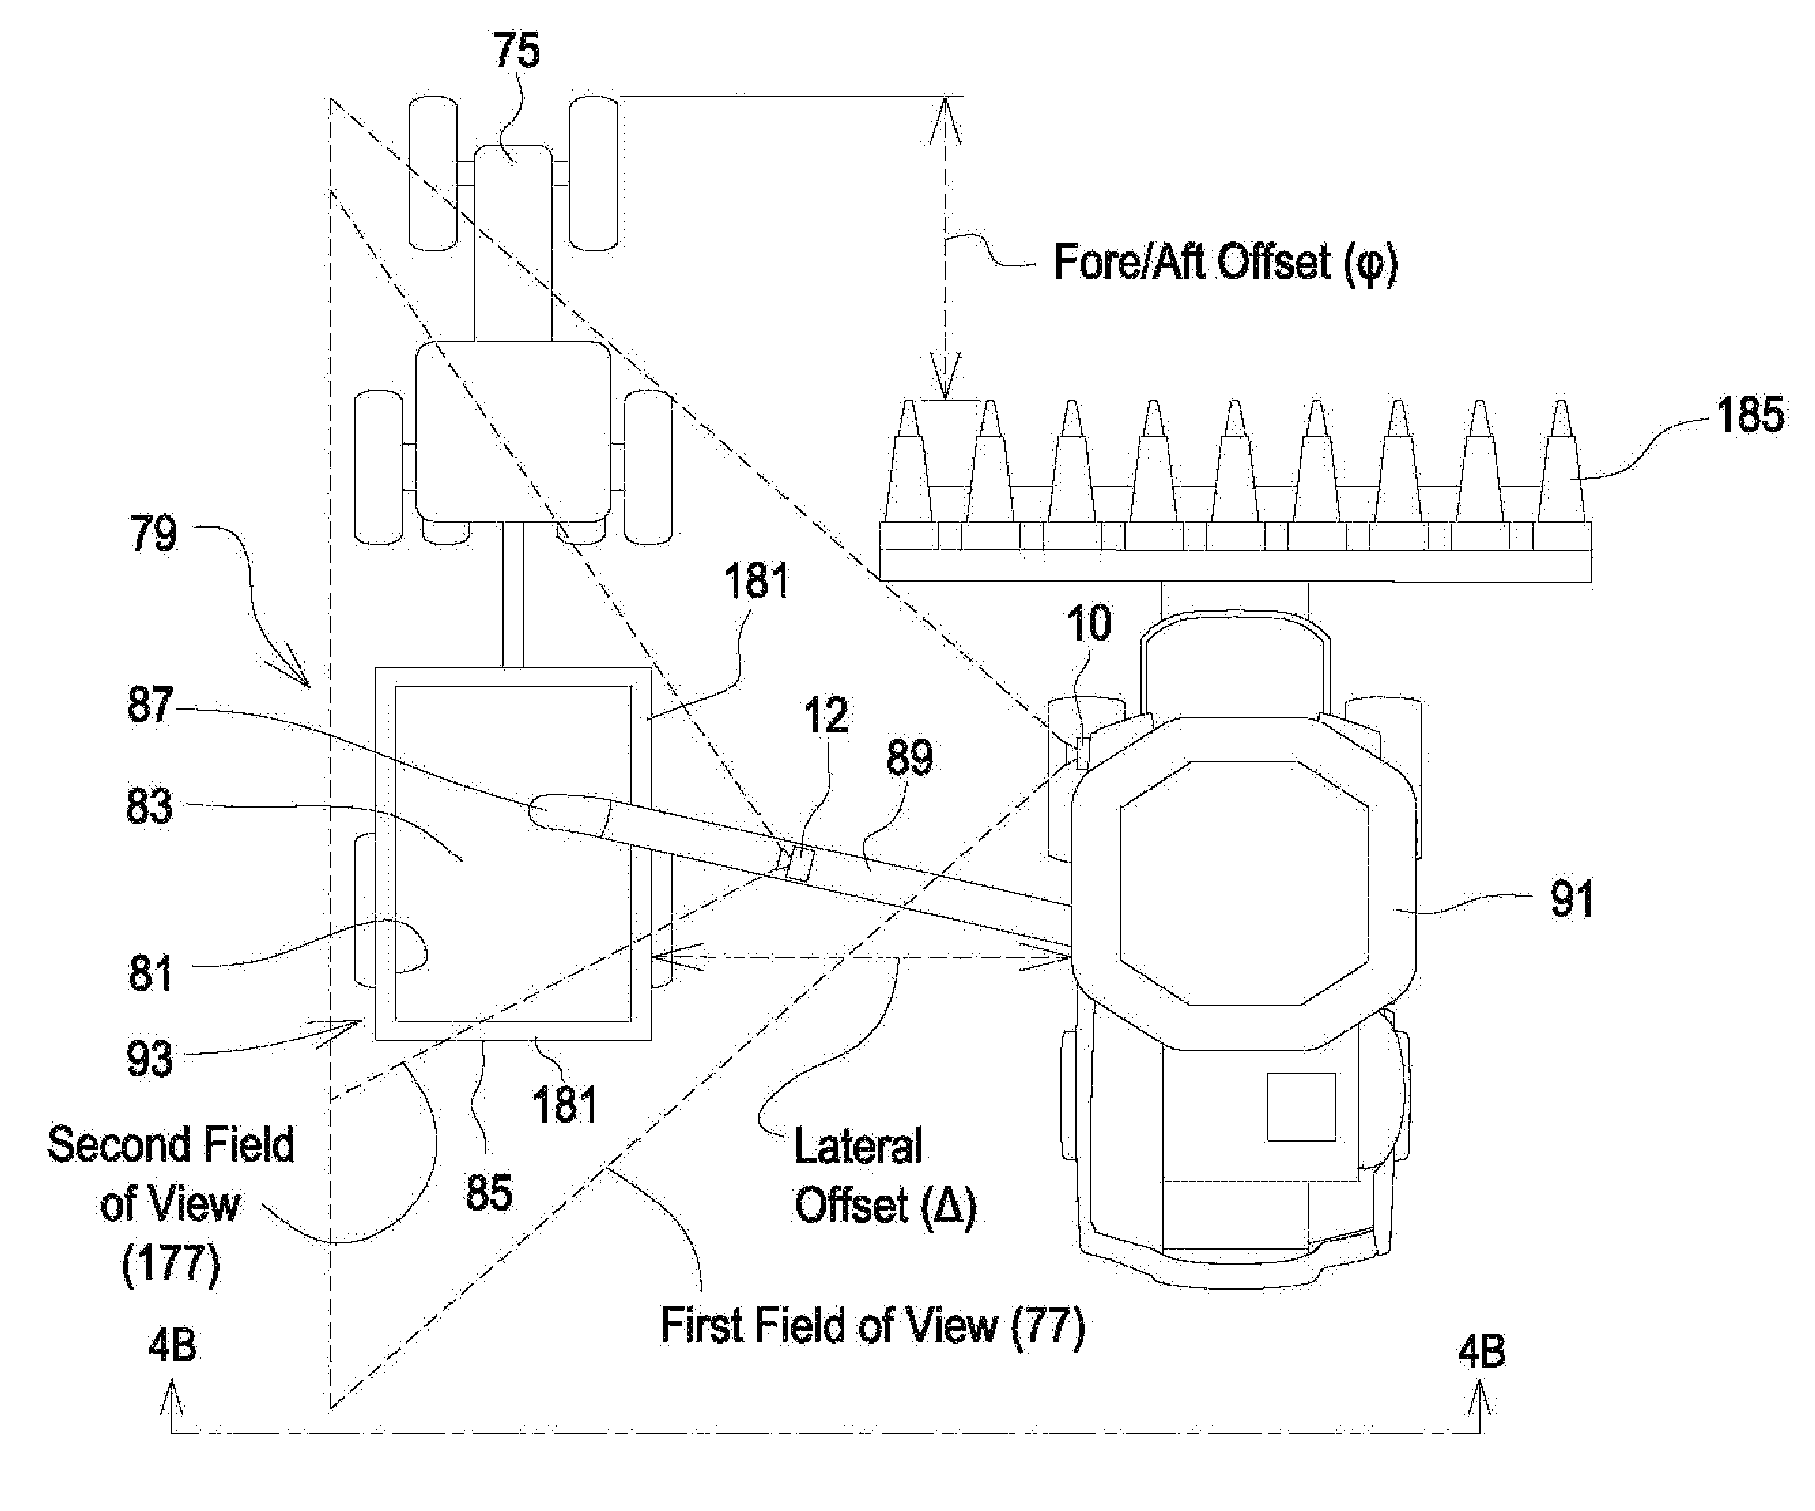 System And Method Of Material Handling Using One Imaging Device On The Receiving Vehicle To Control The Material Distribution Into The Storage Portion Of The Receiving Vehicle